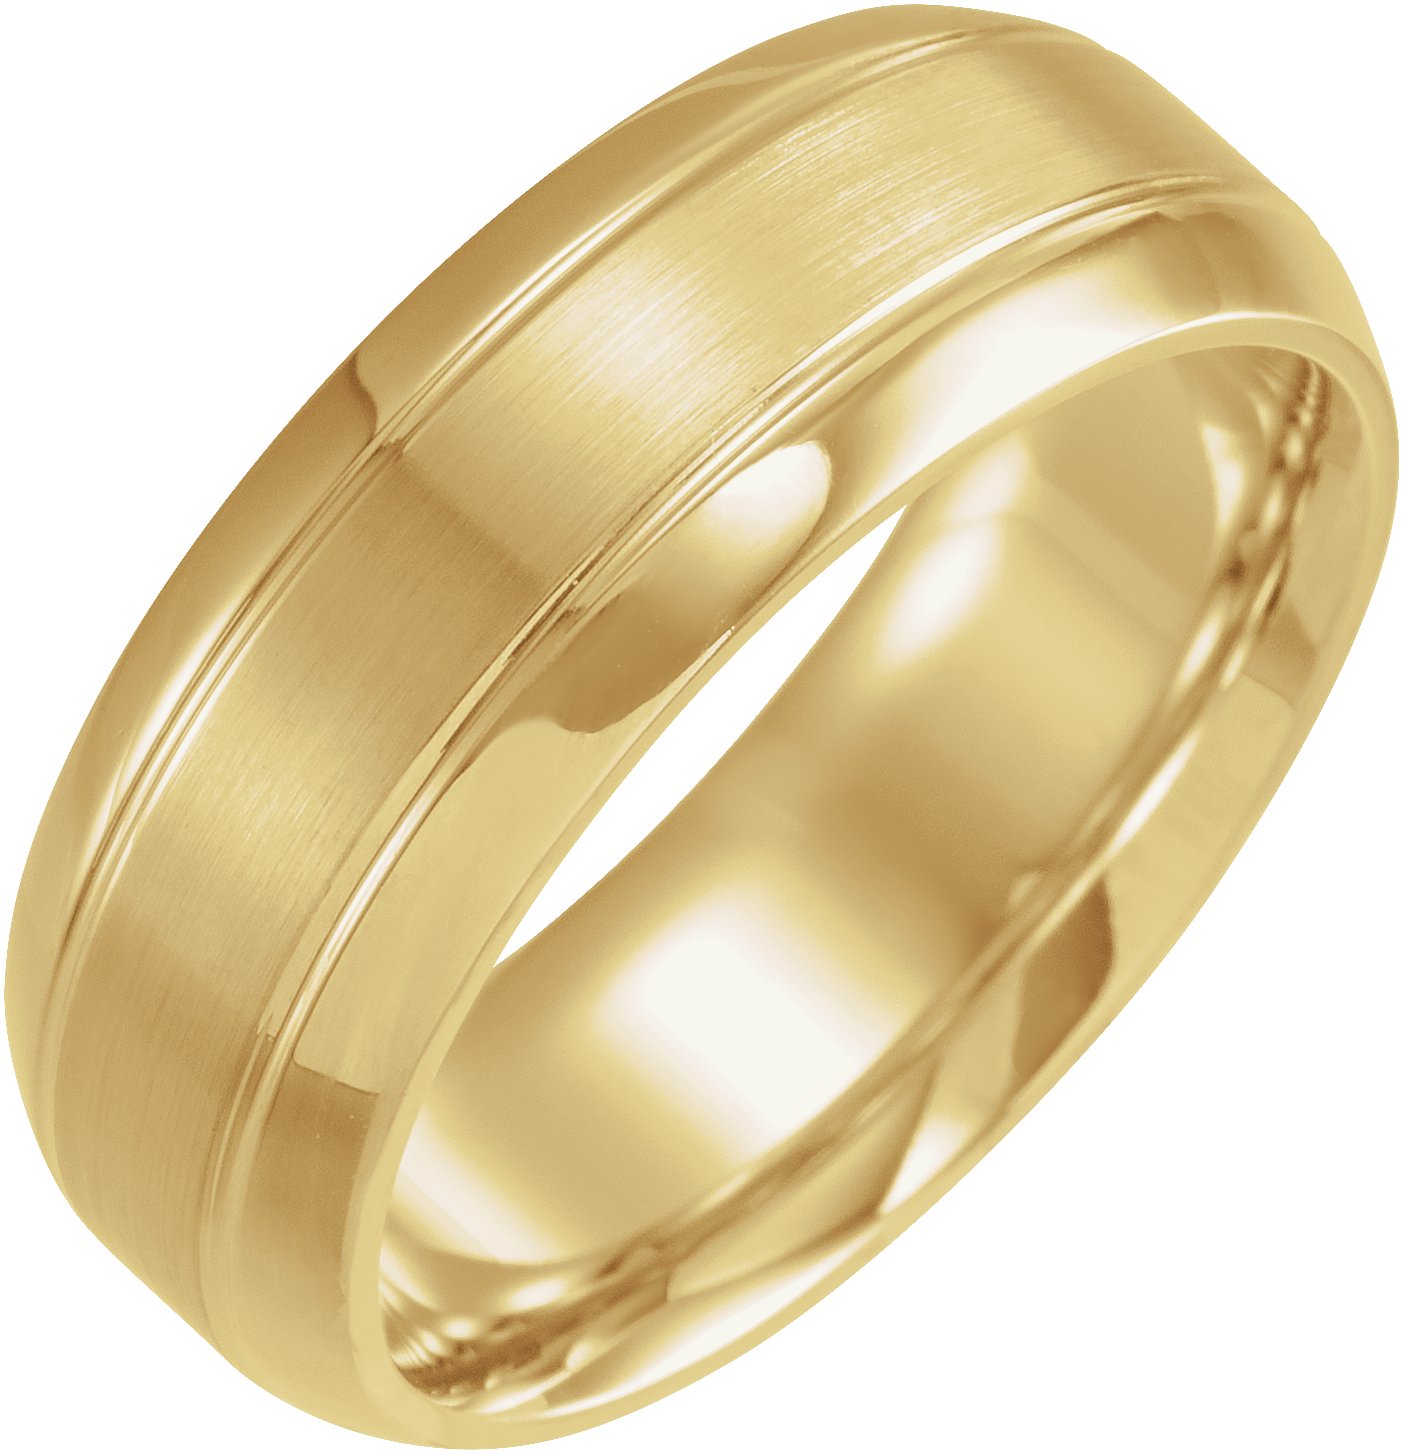 10K Yellow 6 mm Grooved Beveled Edge Band Size 18 Ref 16265048